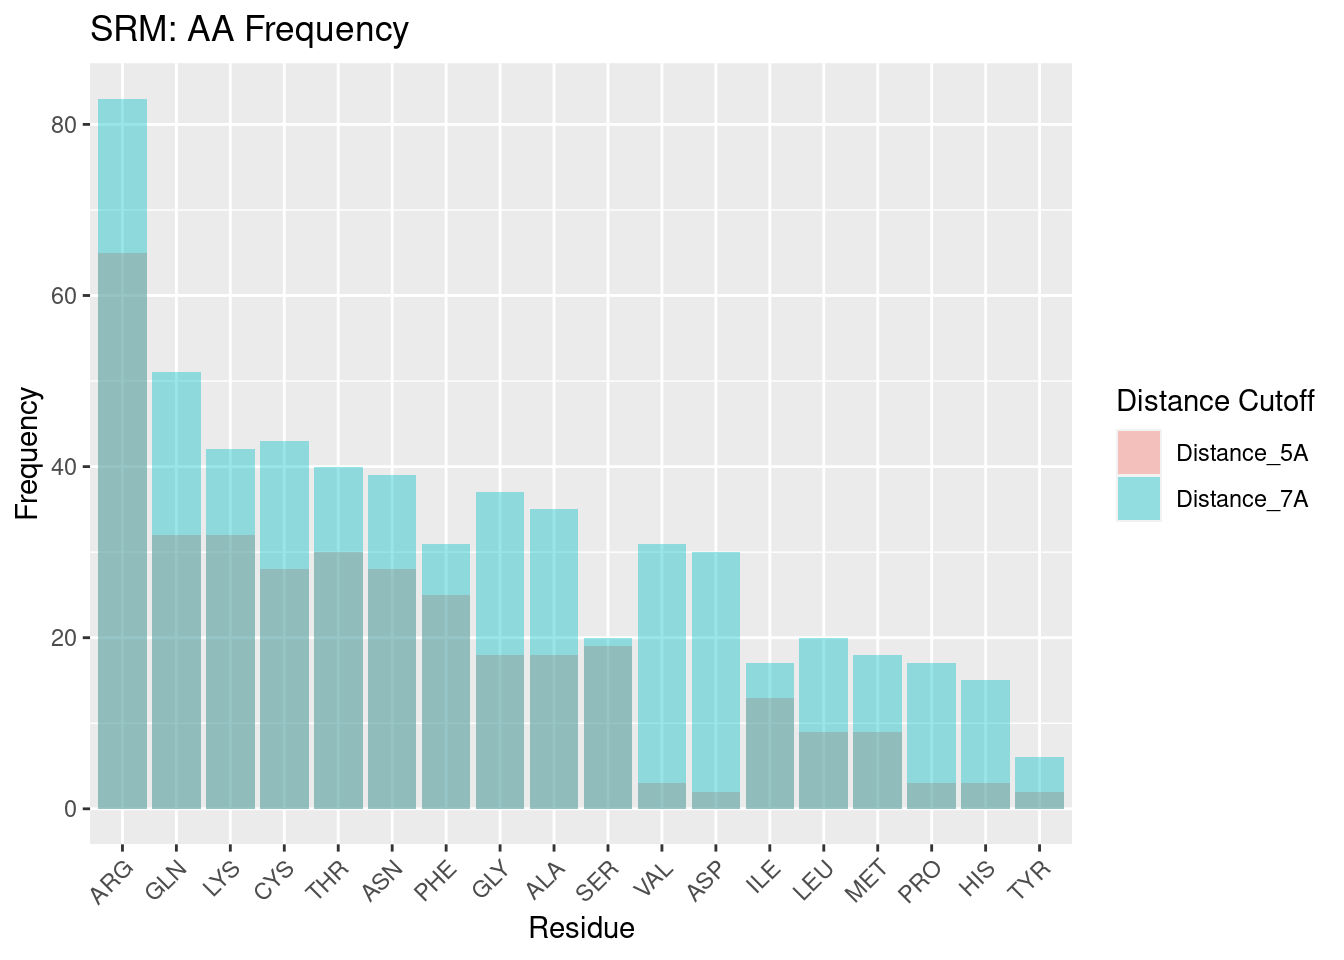 SRM: AA Frequency